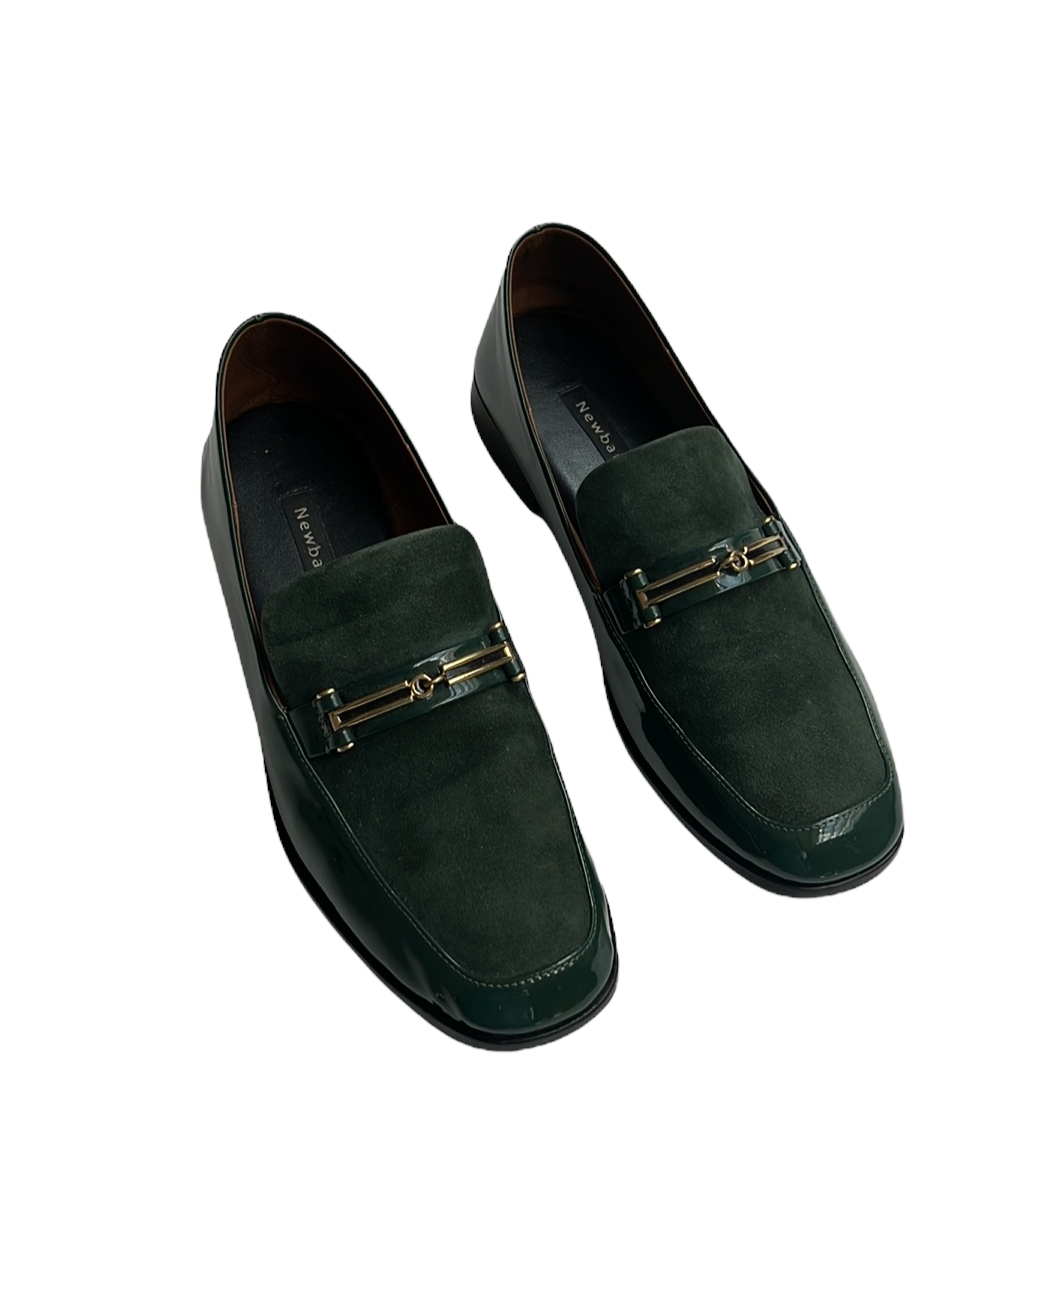 Green Suede and Patent Loafers - 7.5